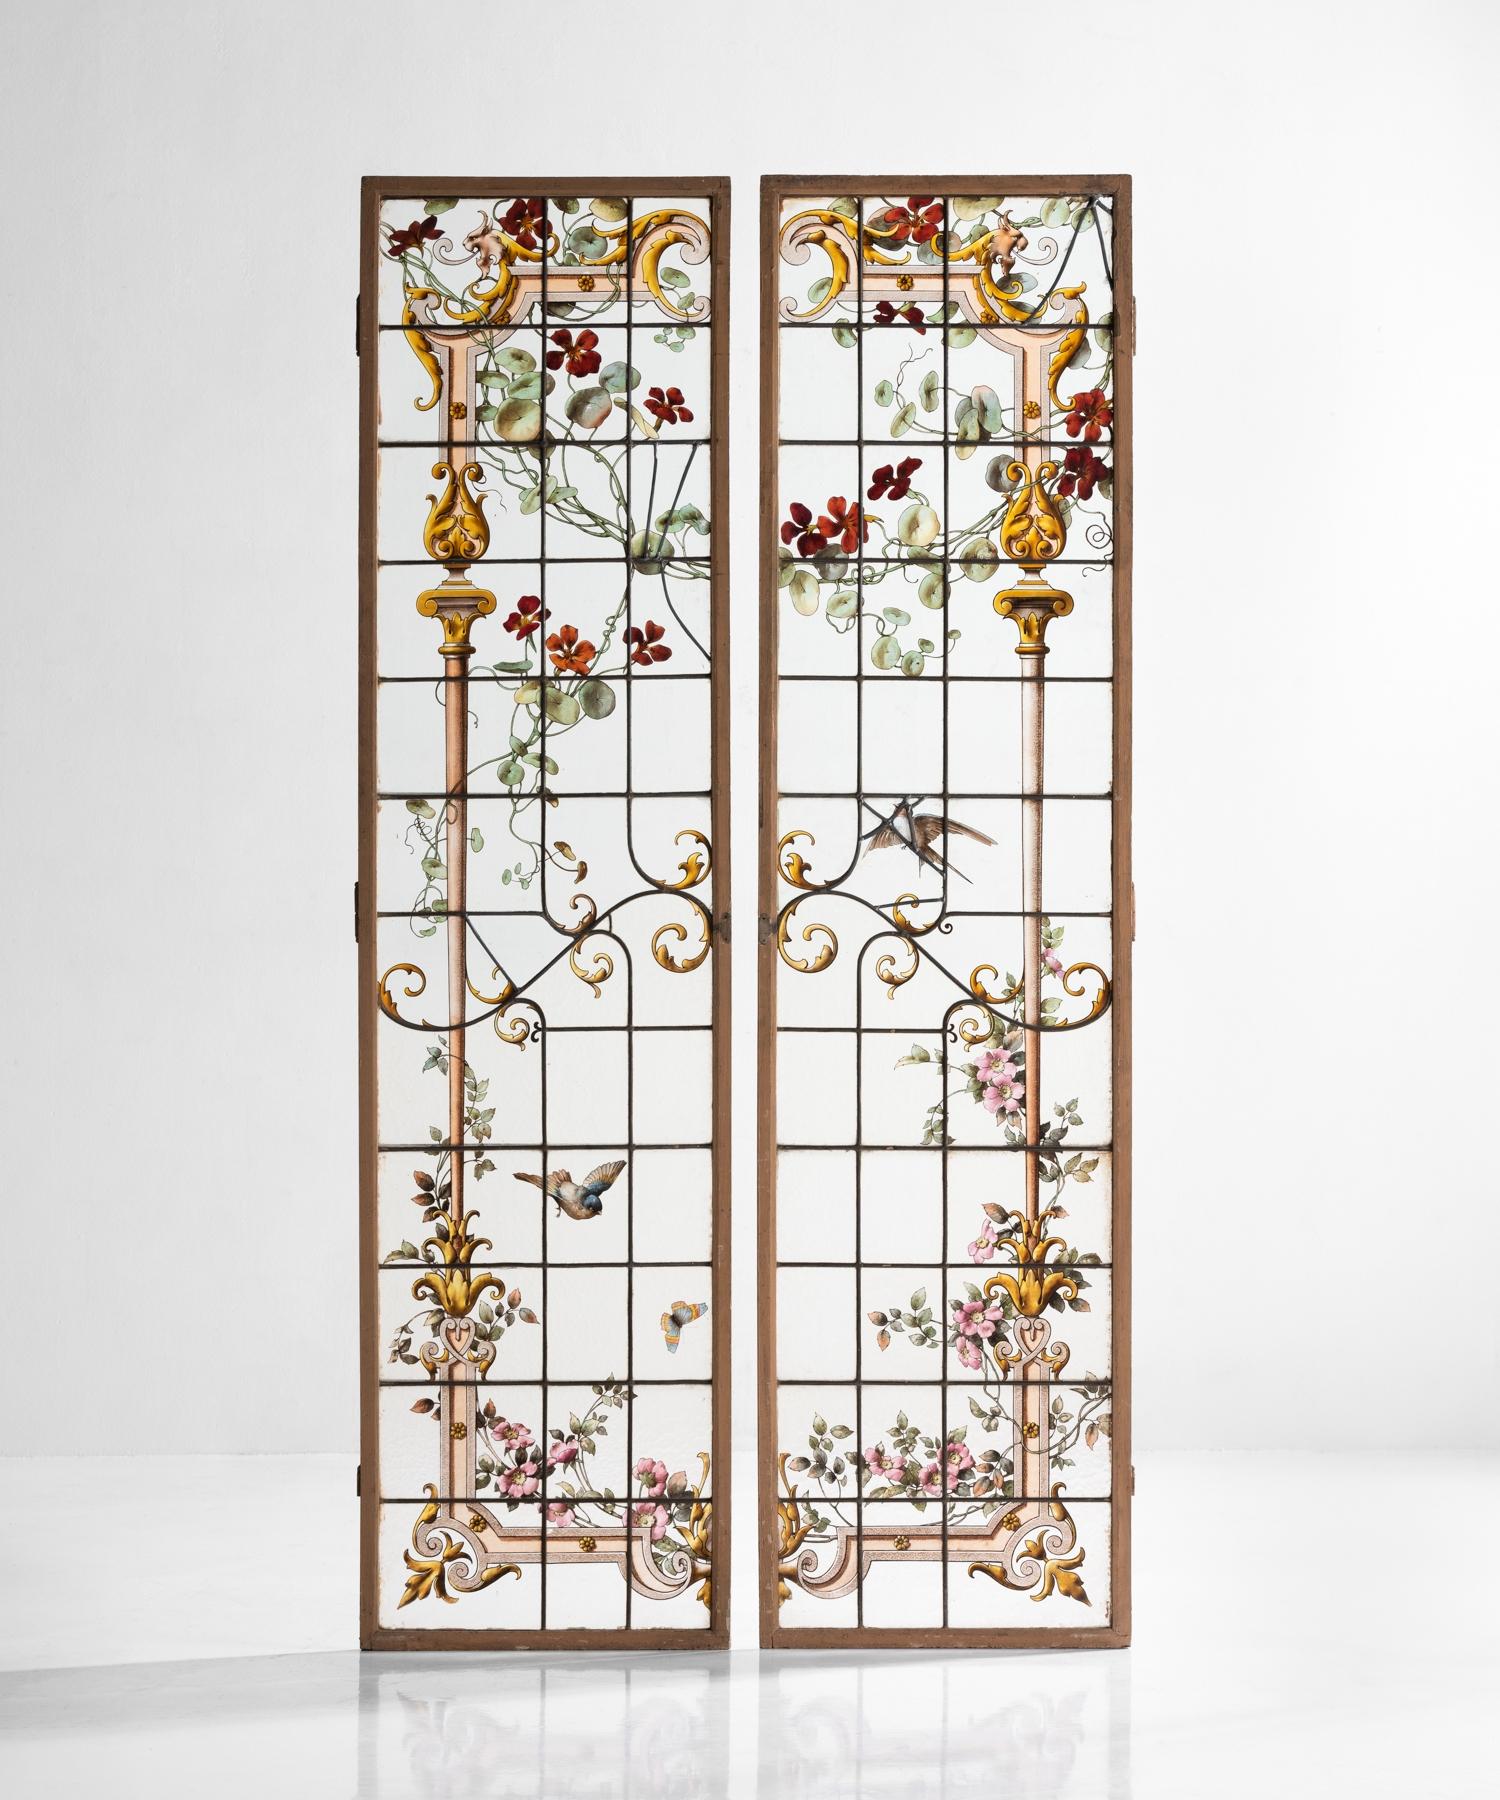 Pair of Renaissance Revival shutters, France, circa 1900

Intricate hand painted garden motif on glass panes with iron supports in original wooden shutters.